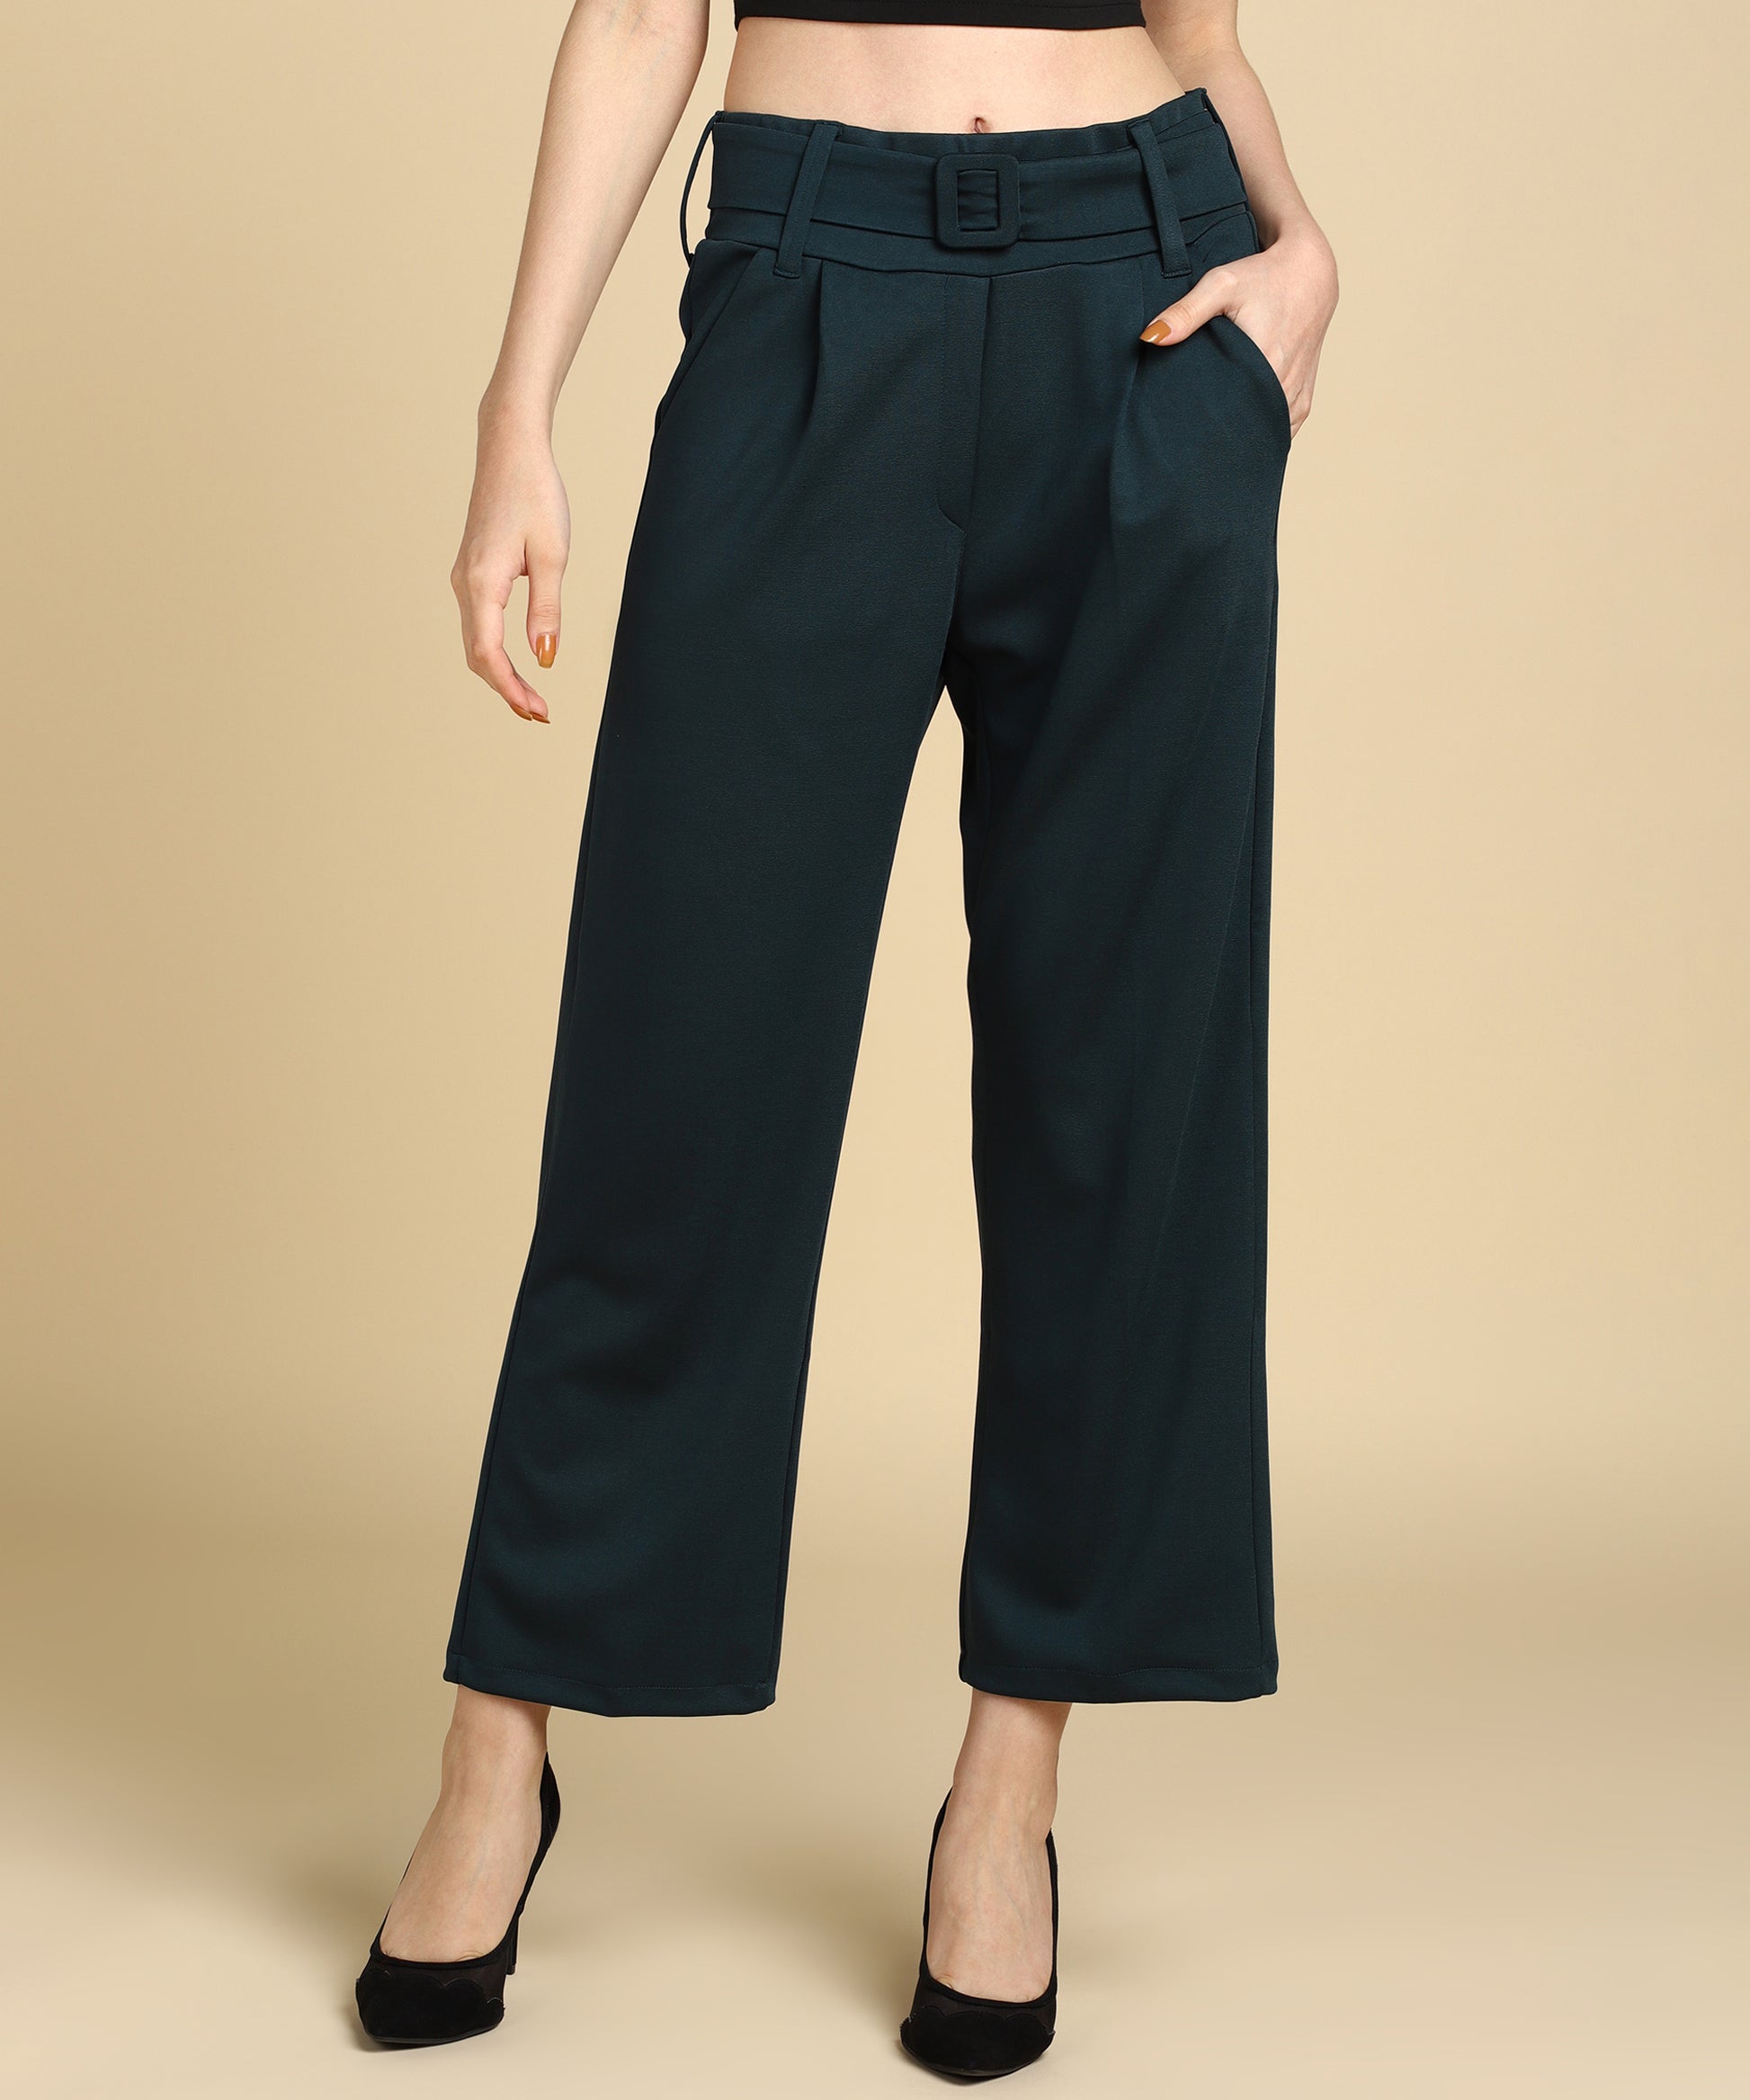 Buy Stretchable Formal Pants & High Waist Formal Pants For Ladies